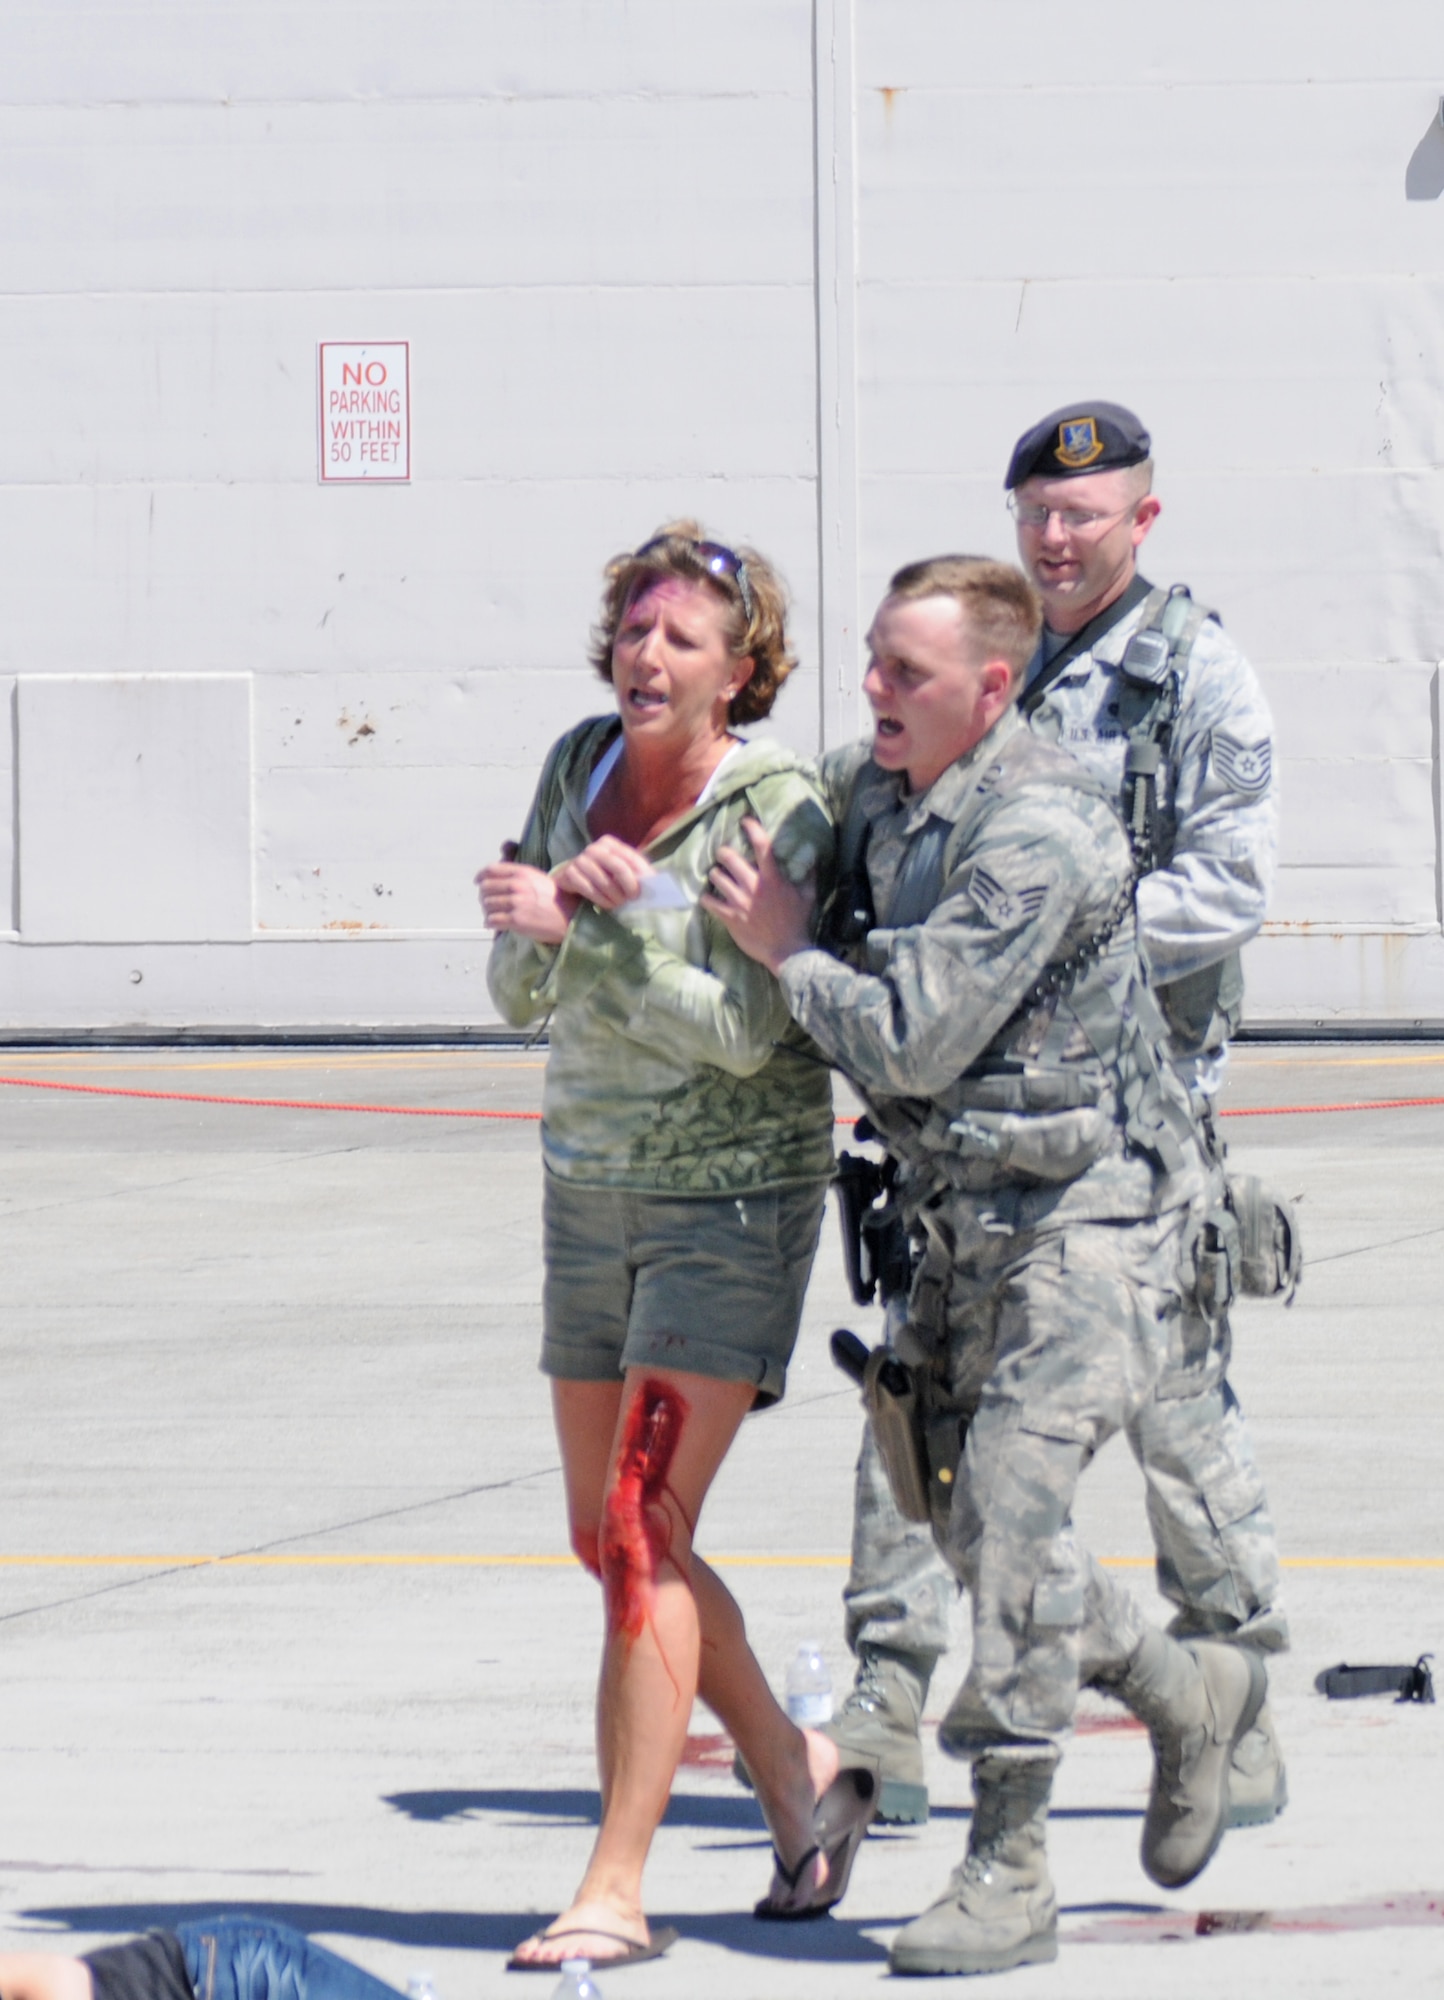 Members of the 173rd Fighter Wing Security Forces Squadron detain a moulaged hysterical individual assists during a major accident response exercise at Kingsley Field, Klamath Falls, Ore. June 1, 2013.   Volunteers from the local community assist with the exercise by playing the role of the wounded.  (Air National Guard photo by Master Sgt. Jennifer Shirar)  